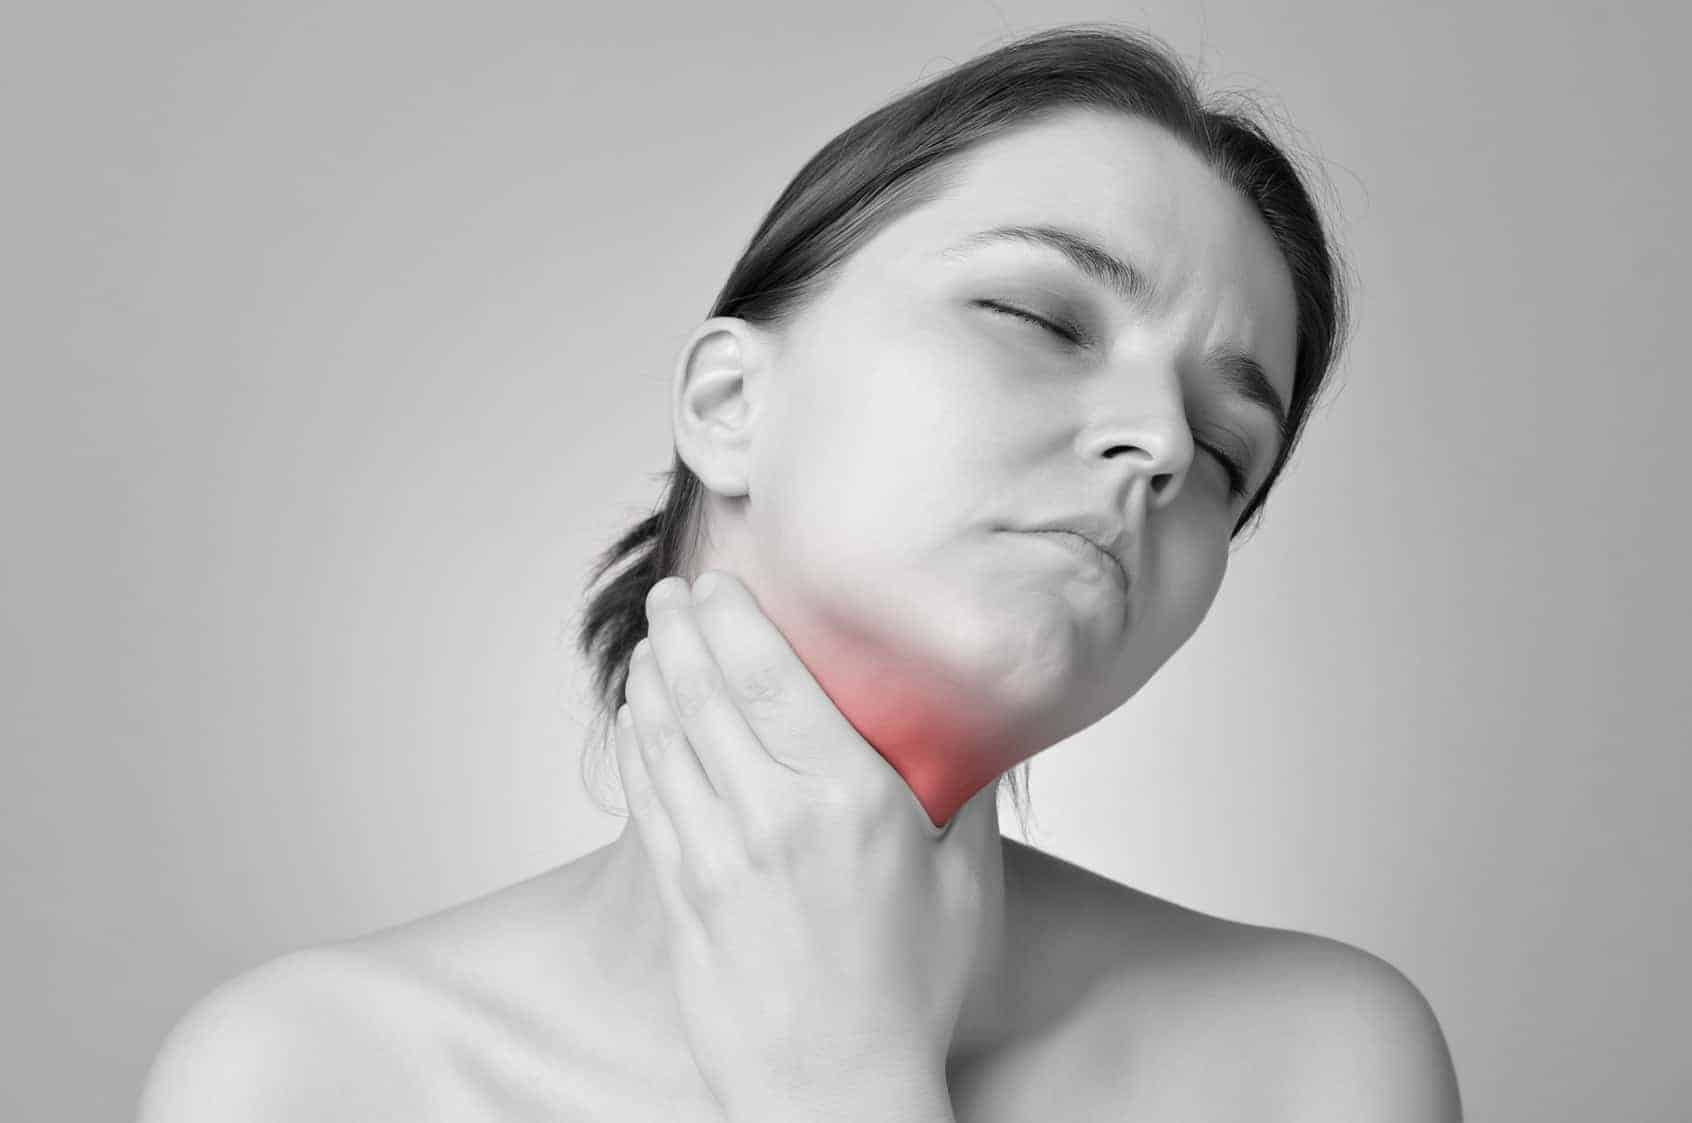 woman touching her thyroid